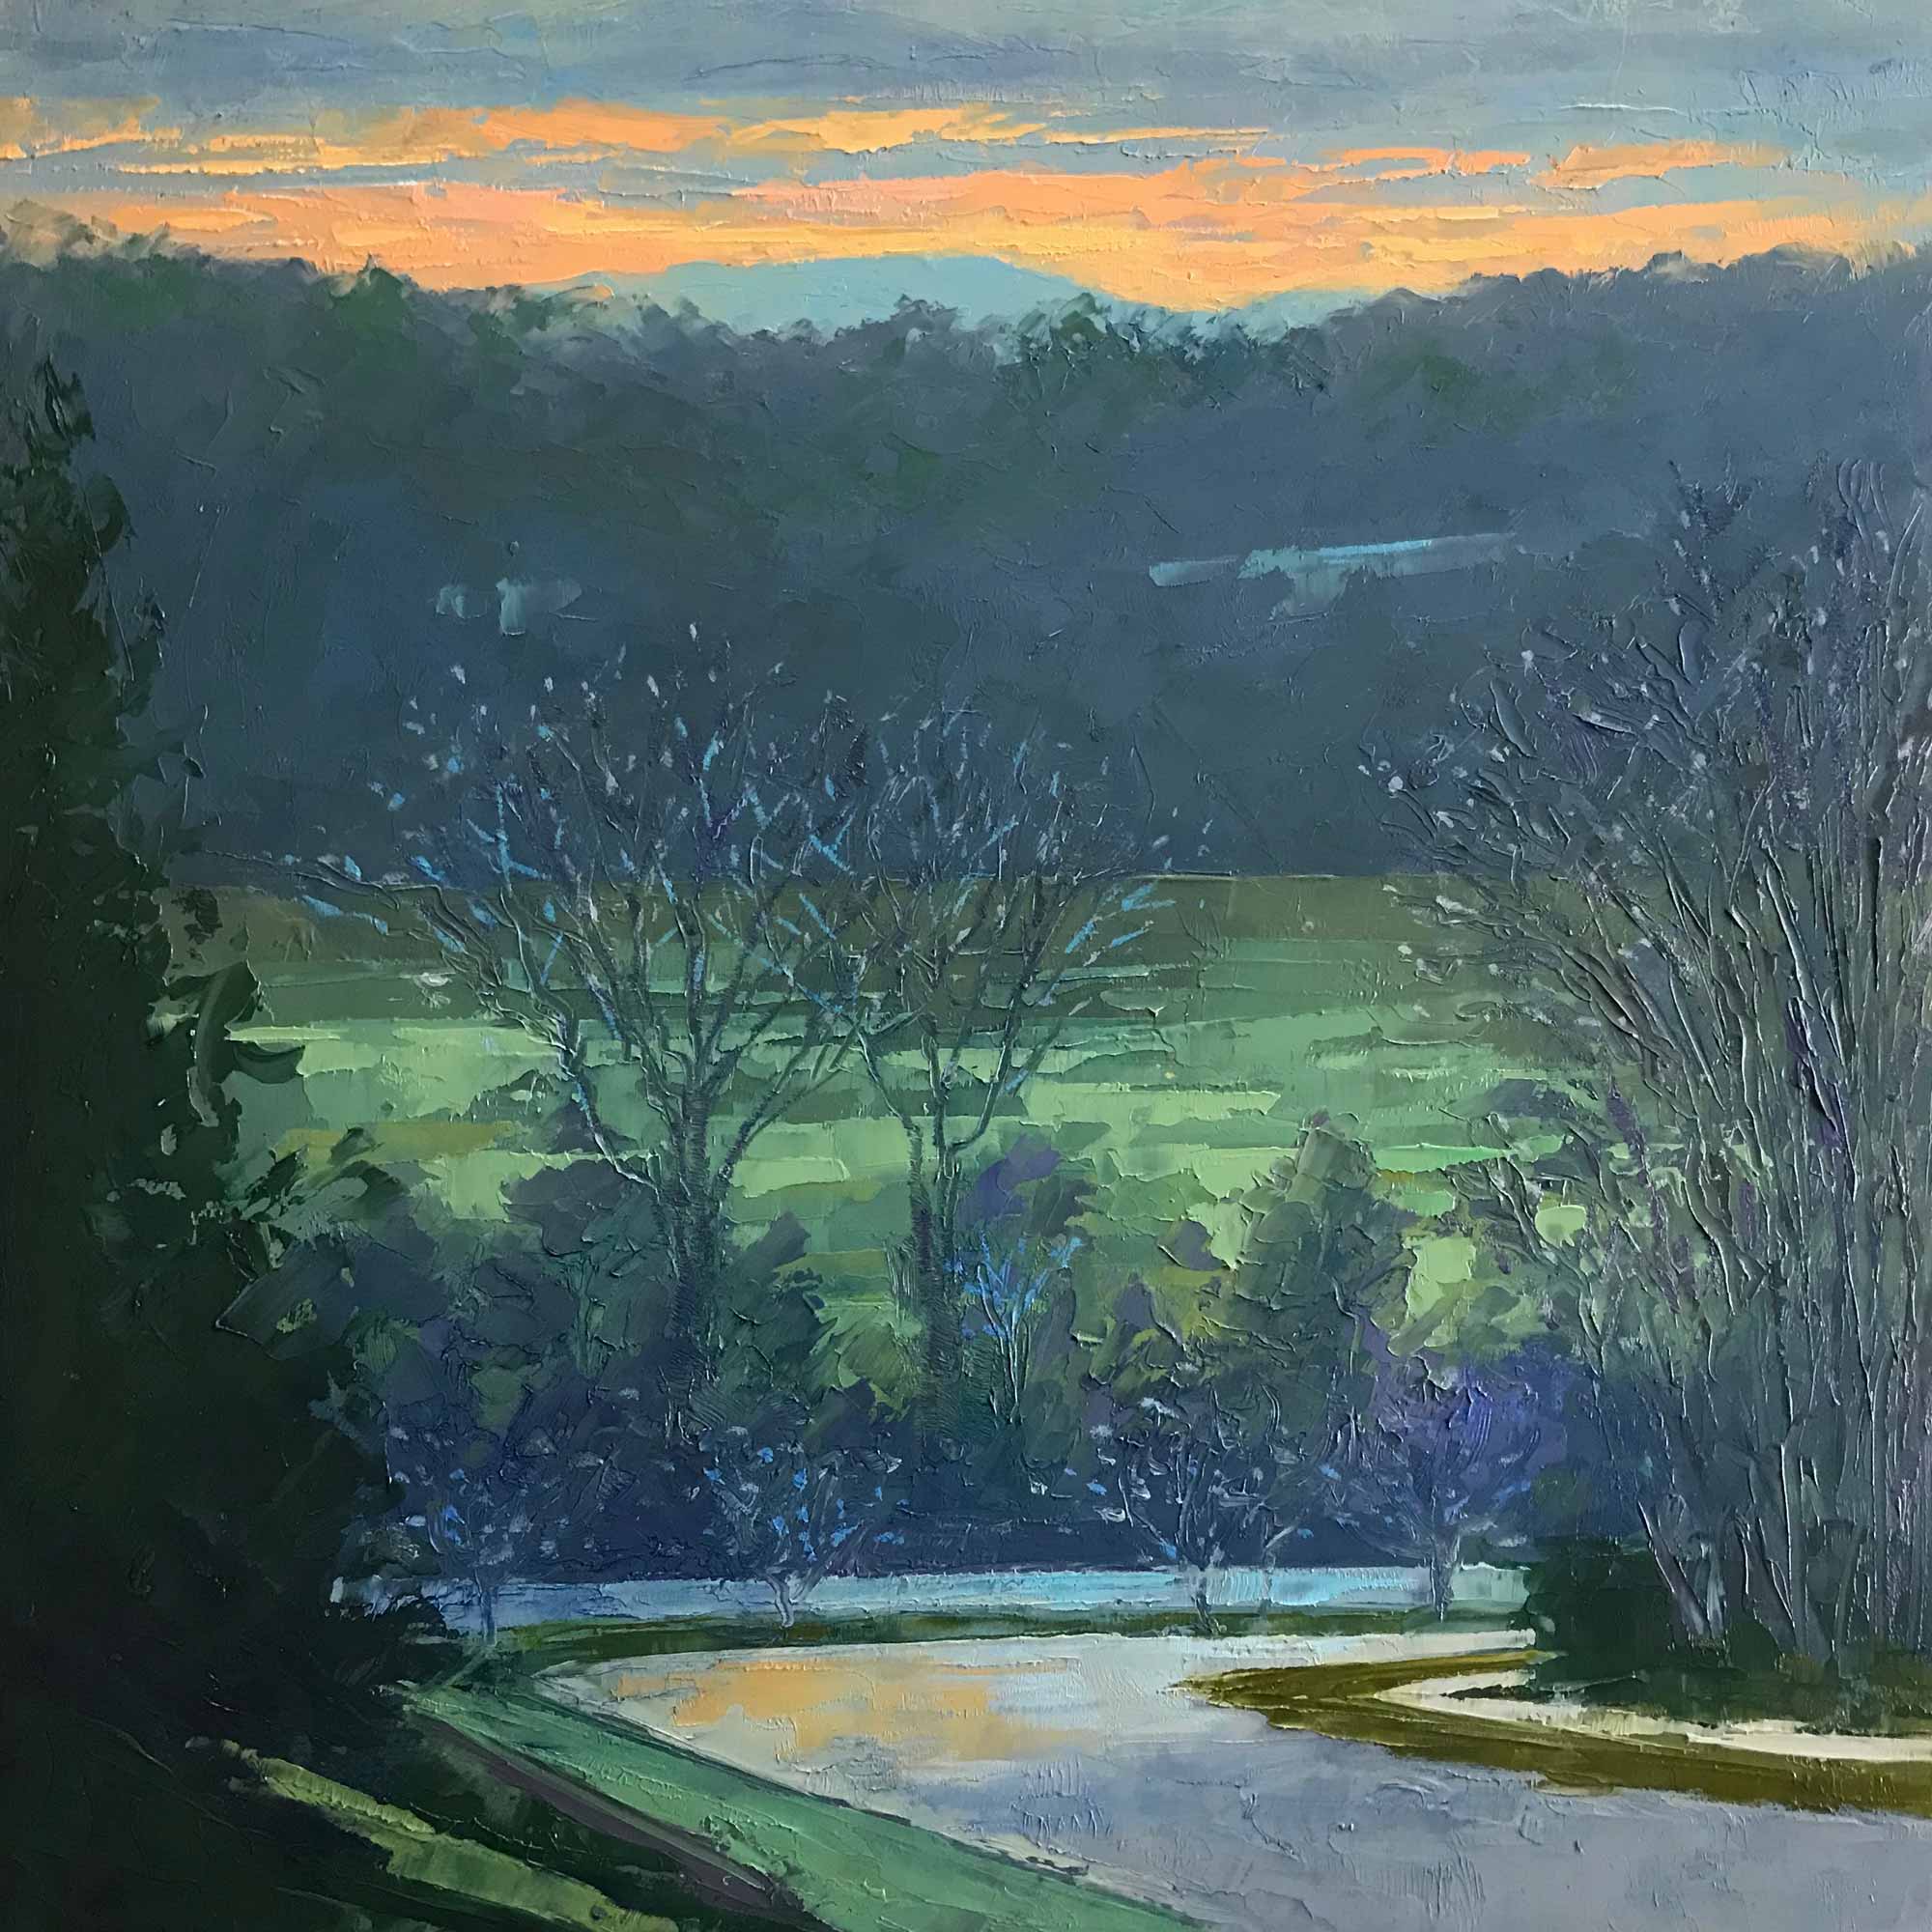 View from the Ridge No. 81, oil on panel, 8 x 8 inches, 2019, SOLD